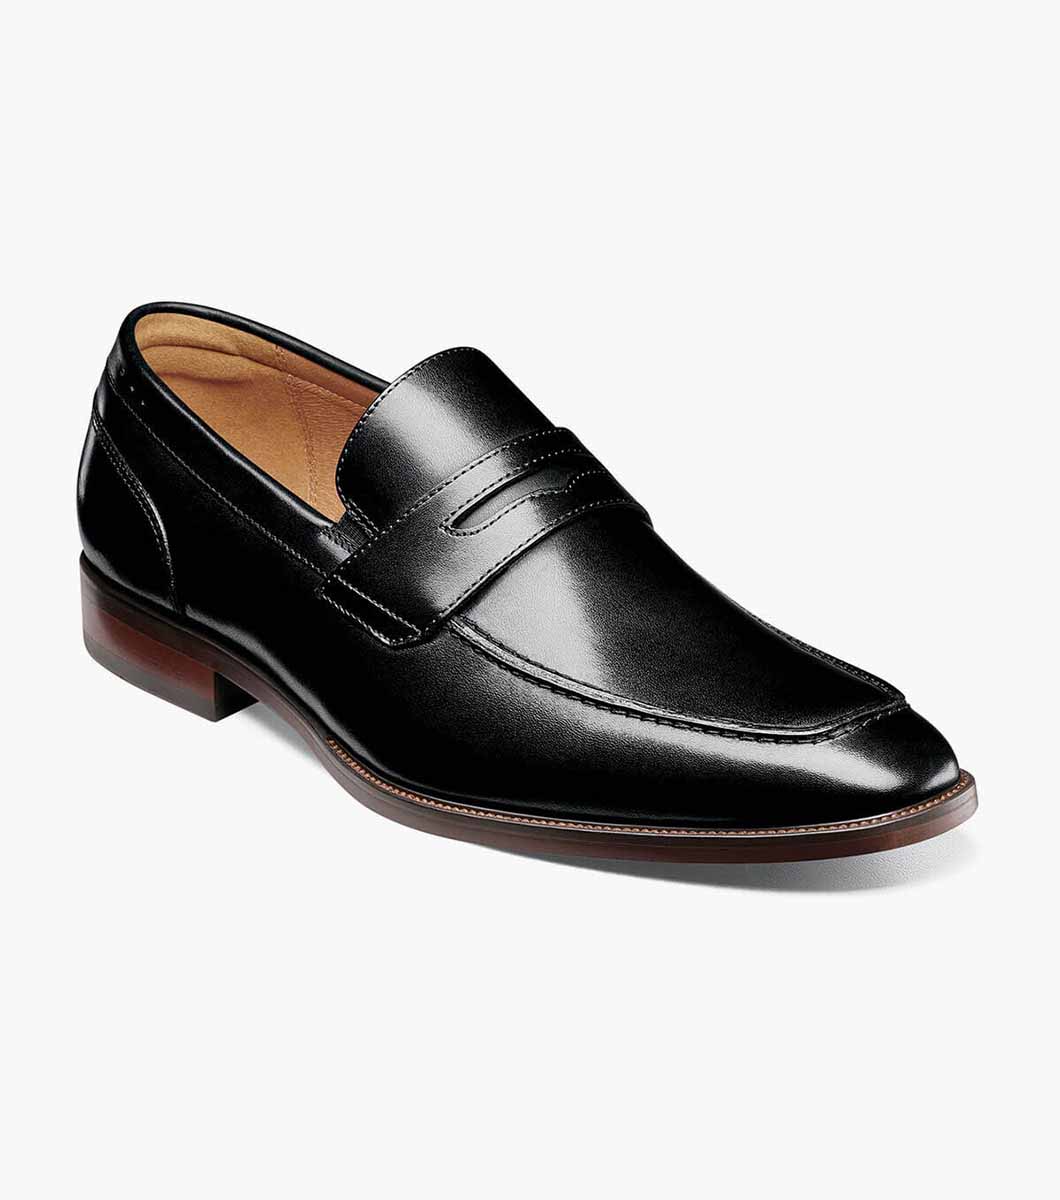 Estate Loafer - Shoes 1ABFNQ